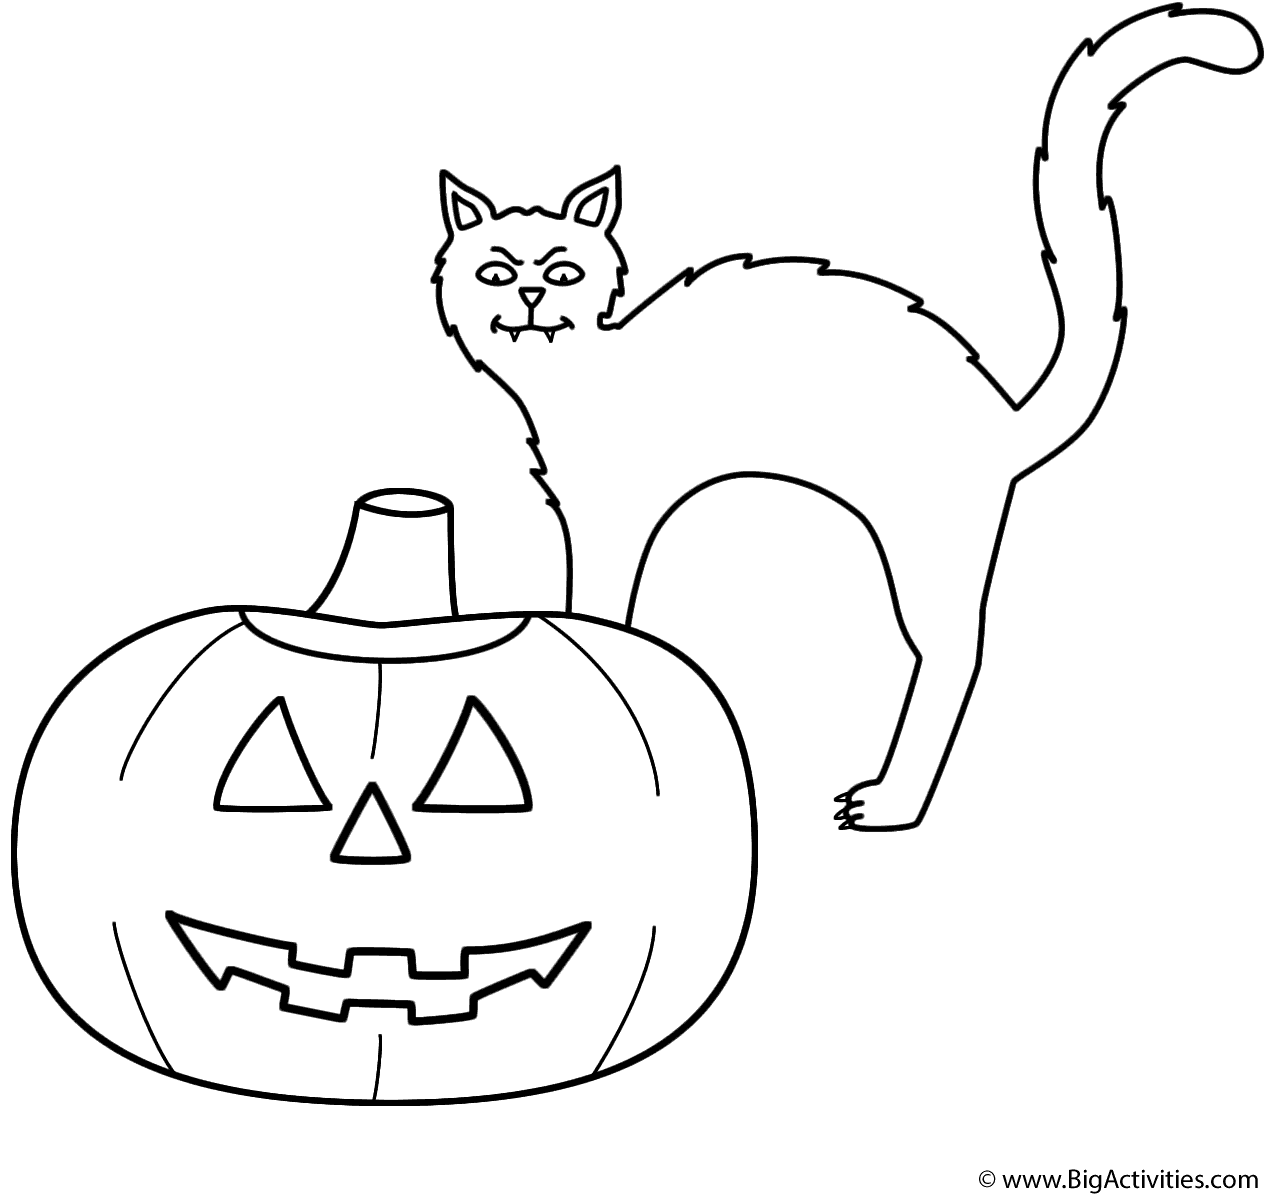 Coloring Pages Halloween Cat / Cat & Moon Halloween Coloring Page | Woo